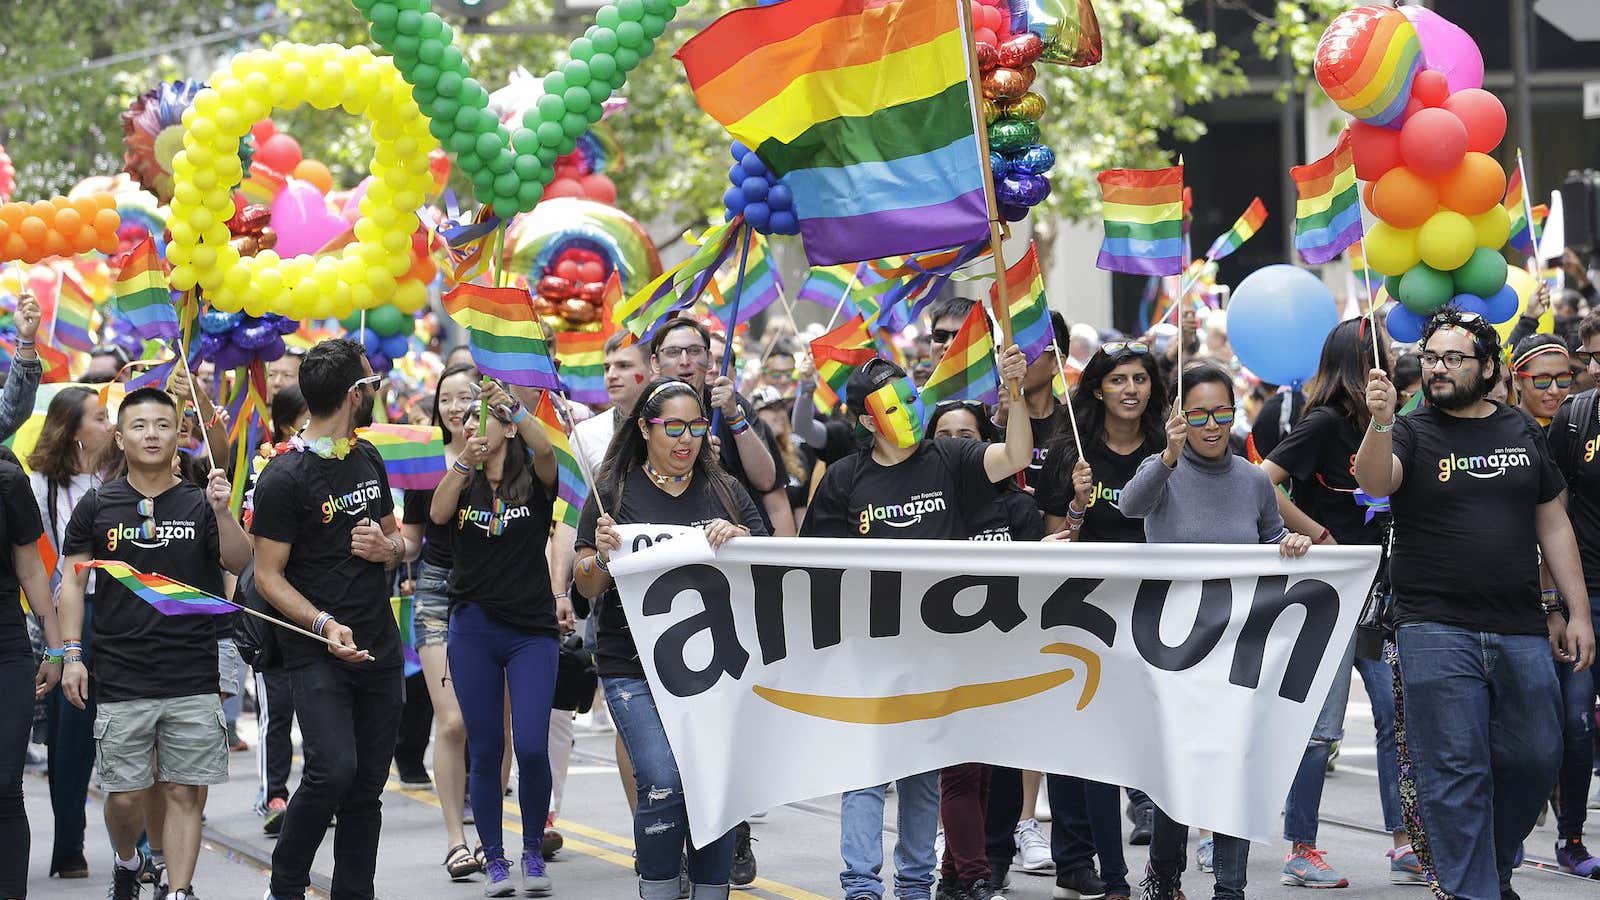 A group with Amazon marches in the Pride parade in San Francisco, Sunday, June 25, 2017.